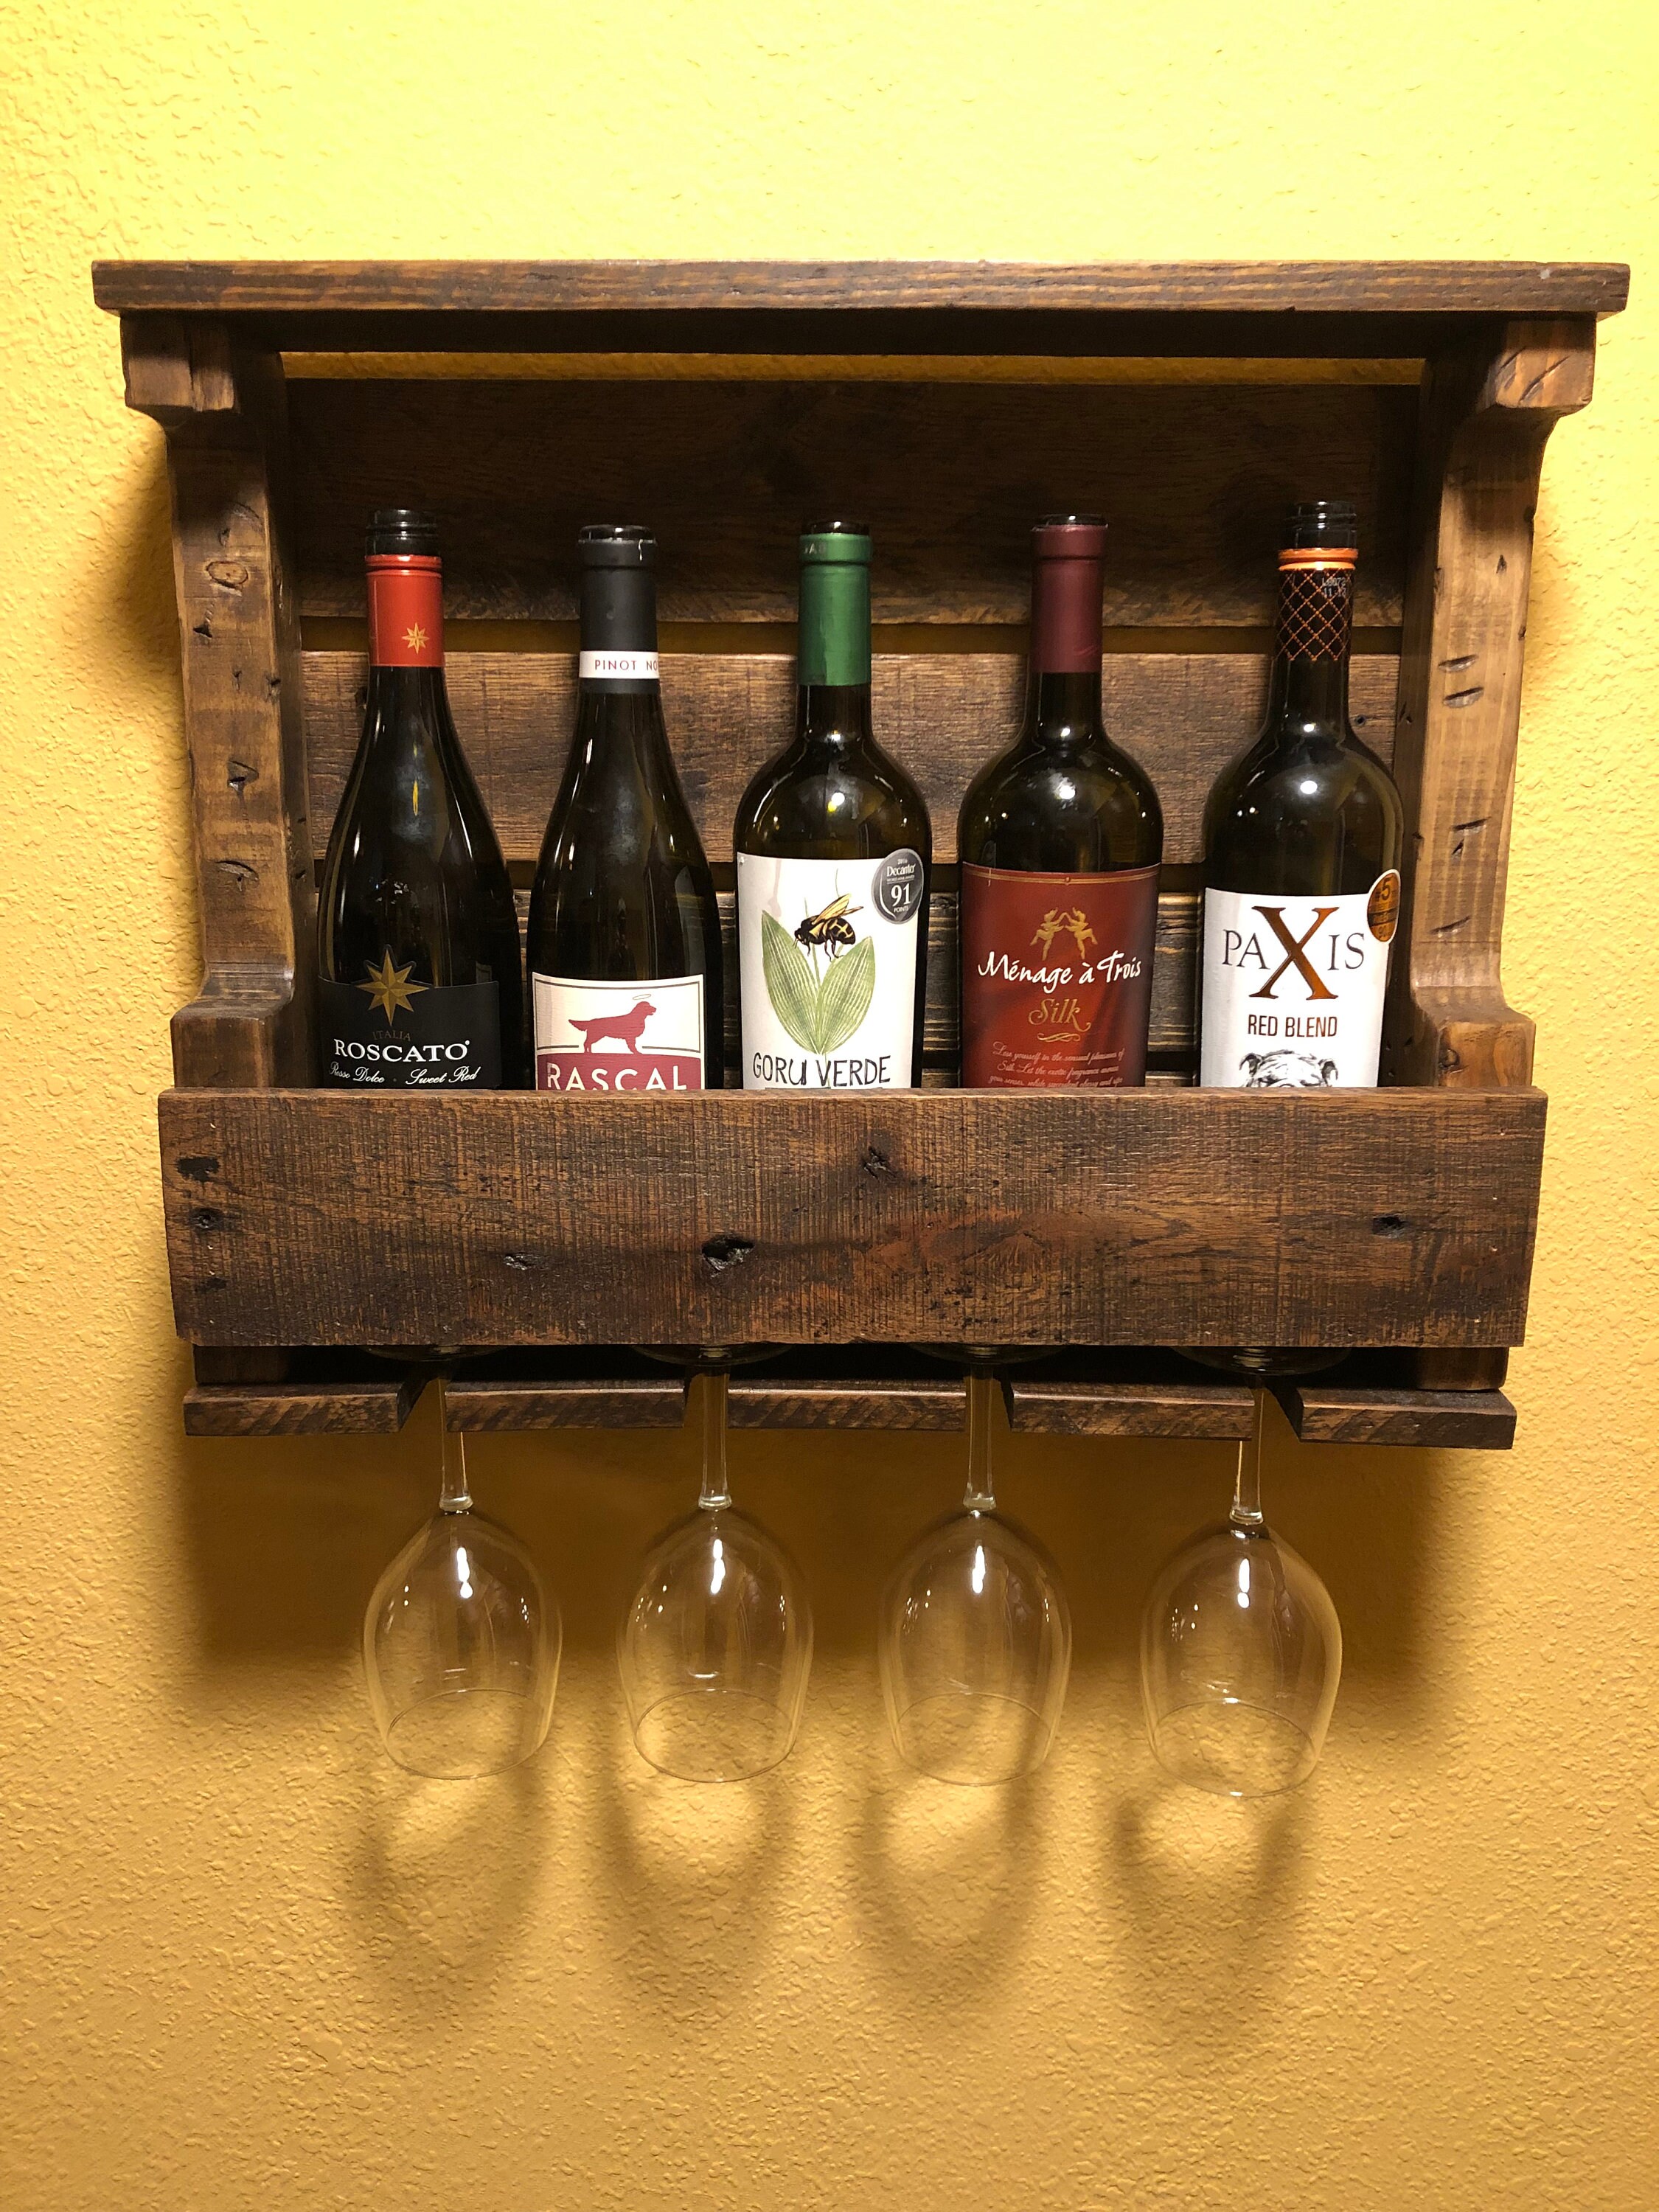 A coat of bright paint and an old wine rack is repurposed as  storage/display for stuf…